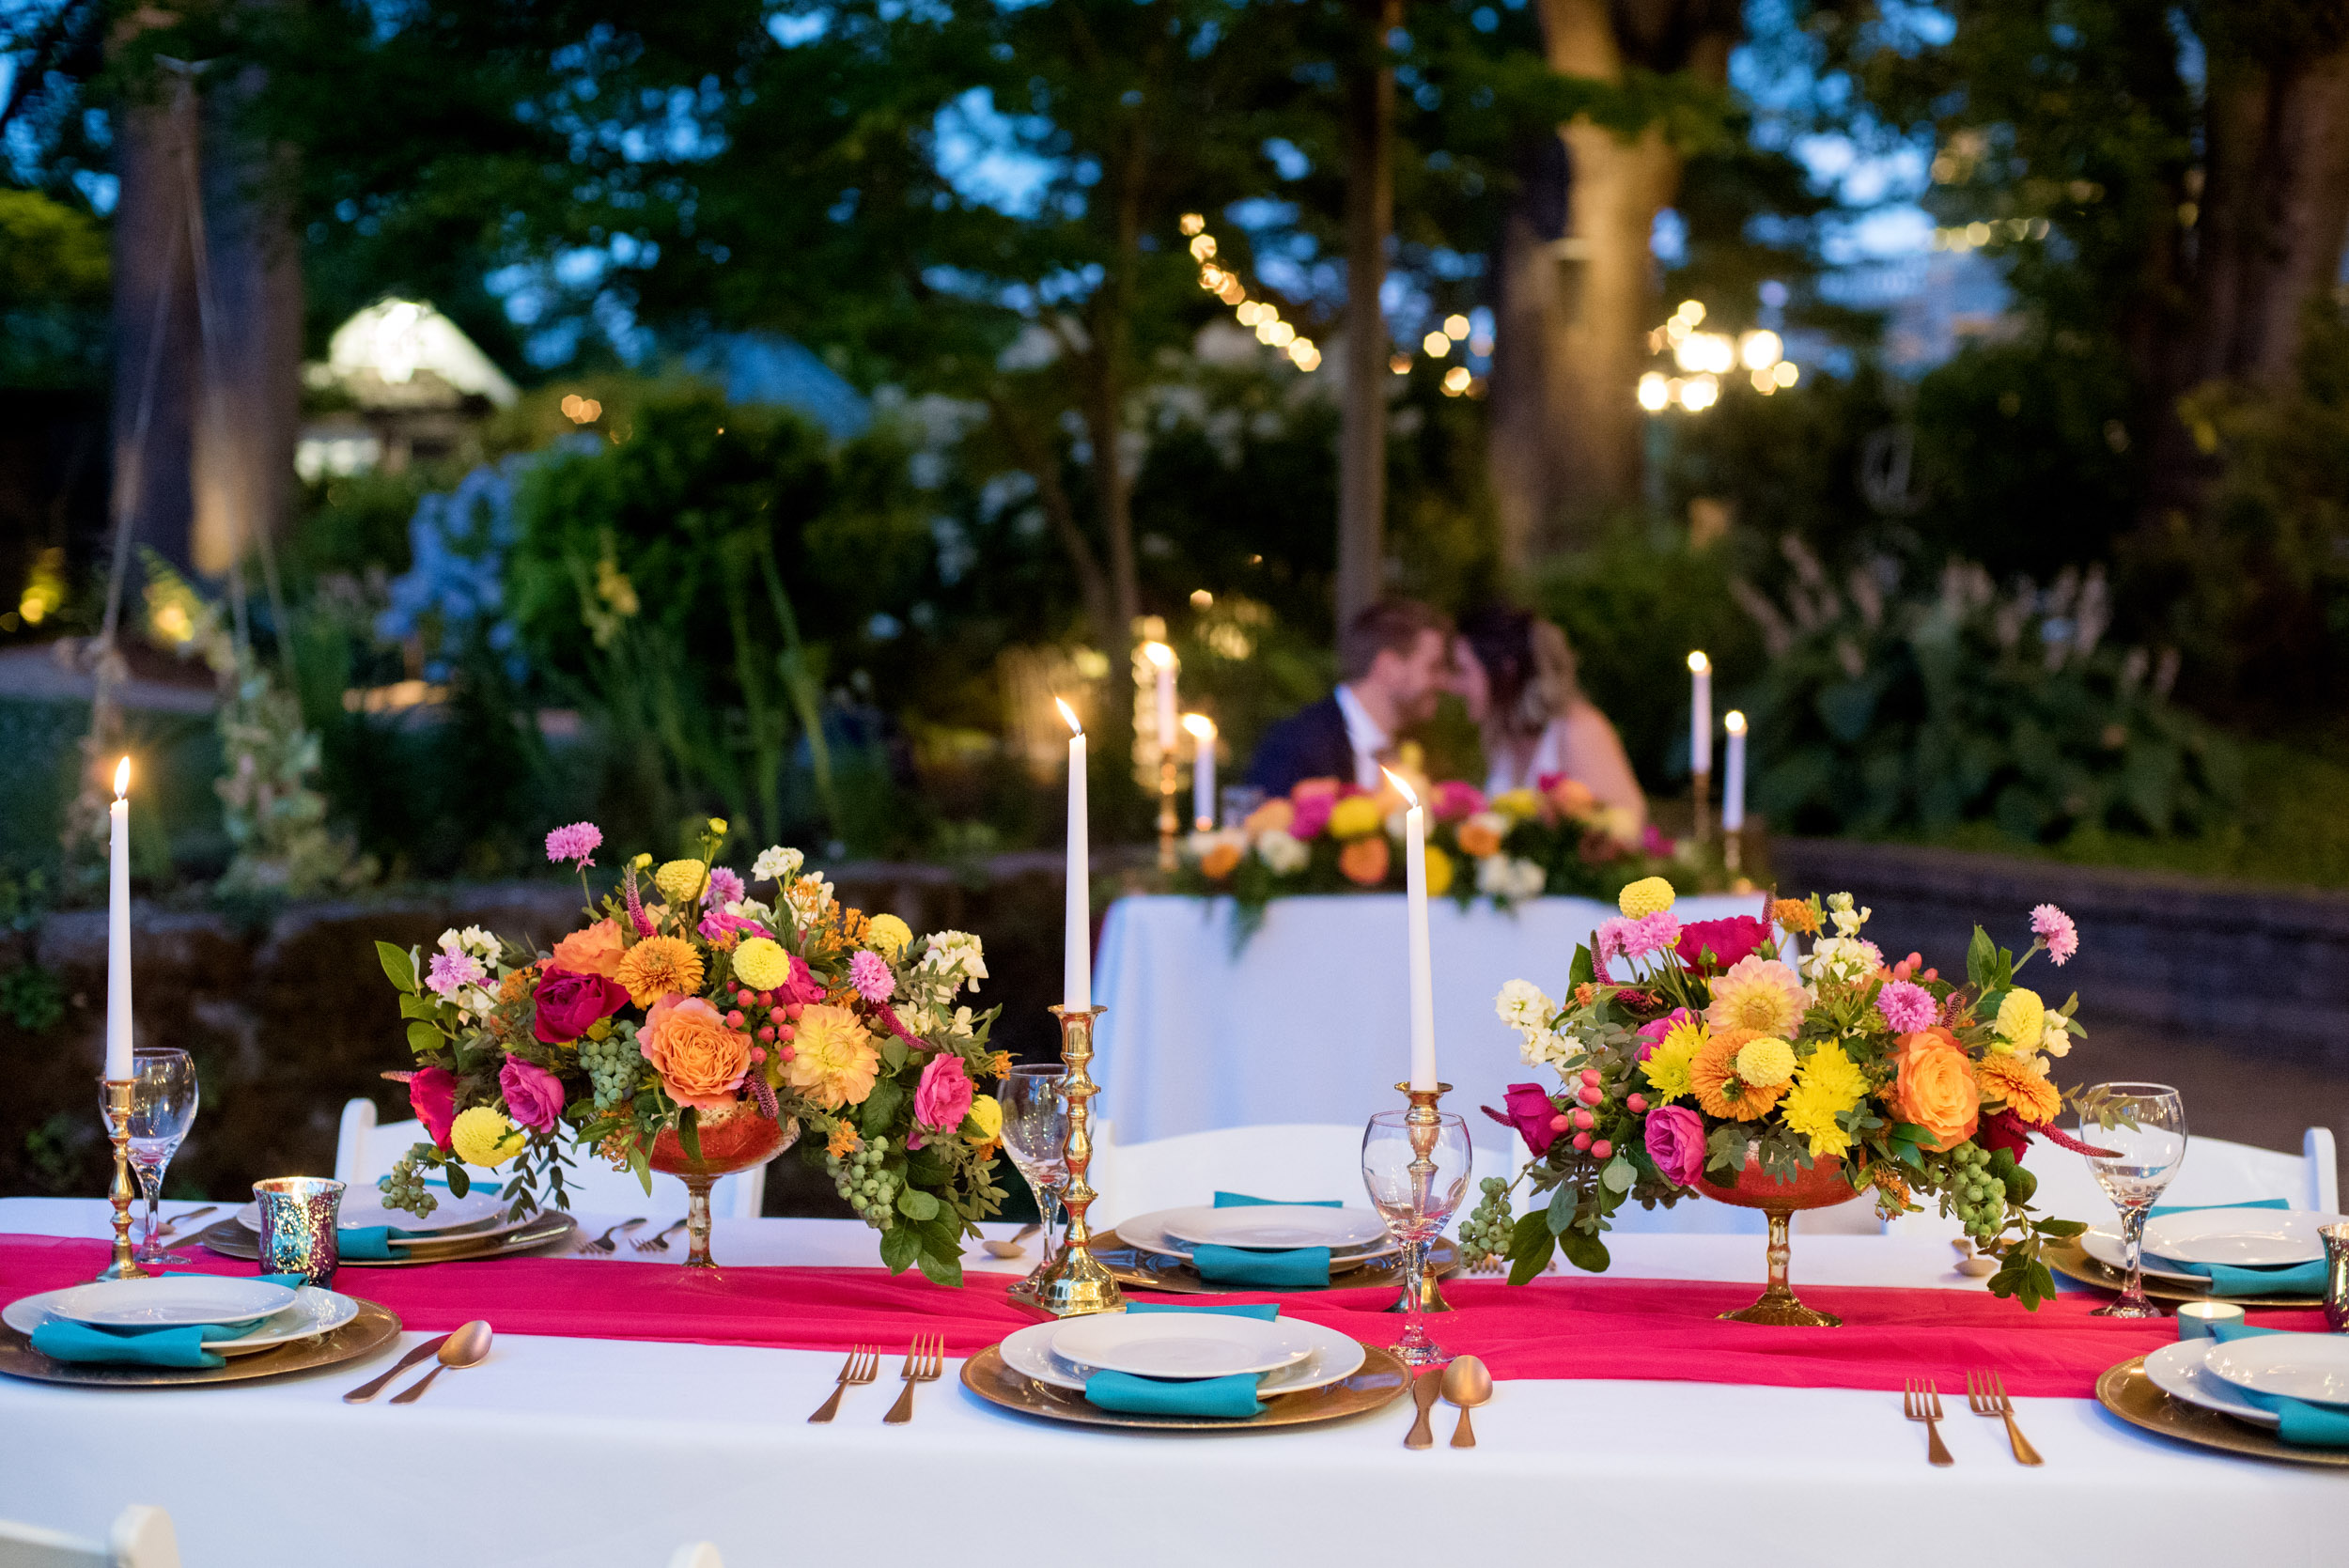 wedding rental styling by rose's rentals in portland